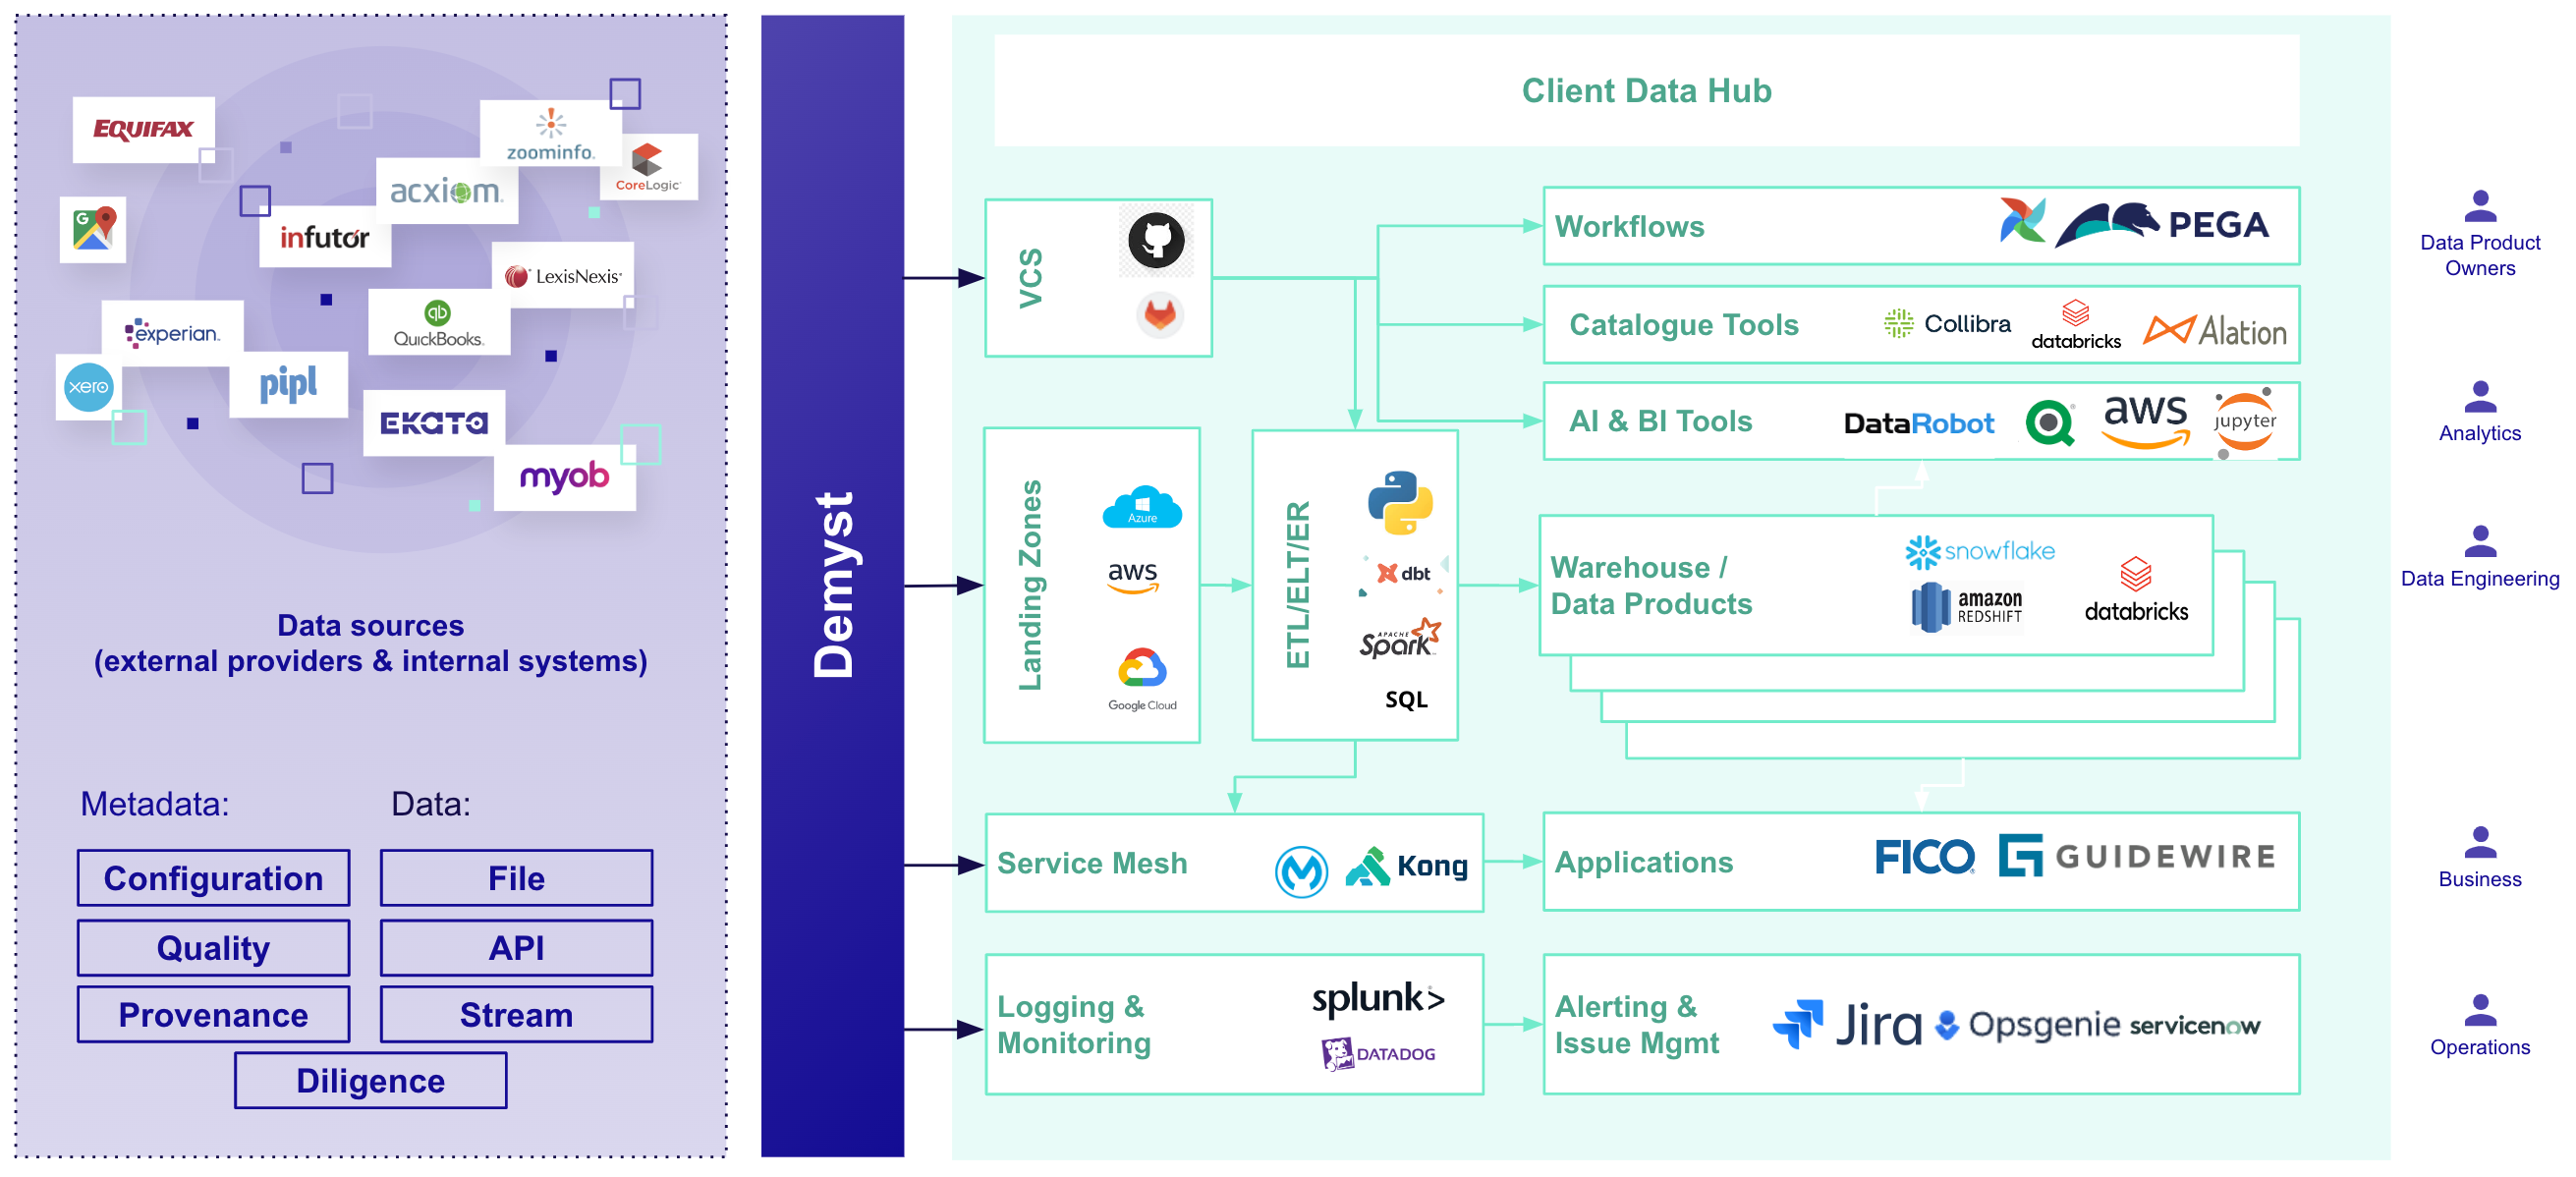 Overview of a typical data hub architecture